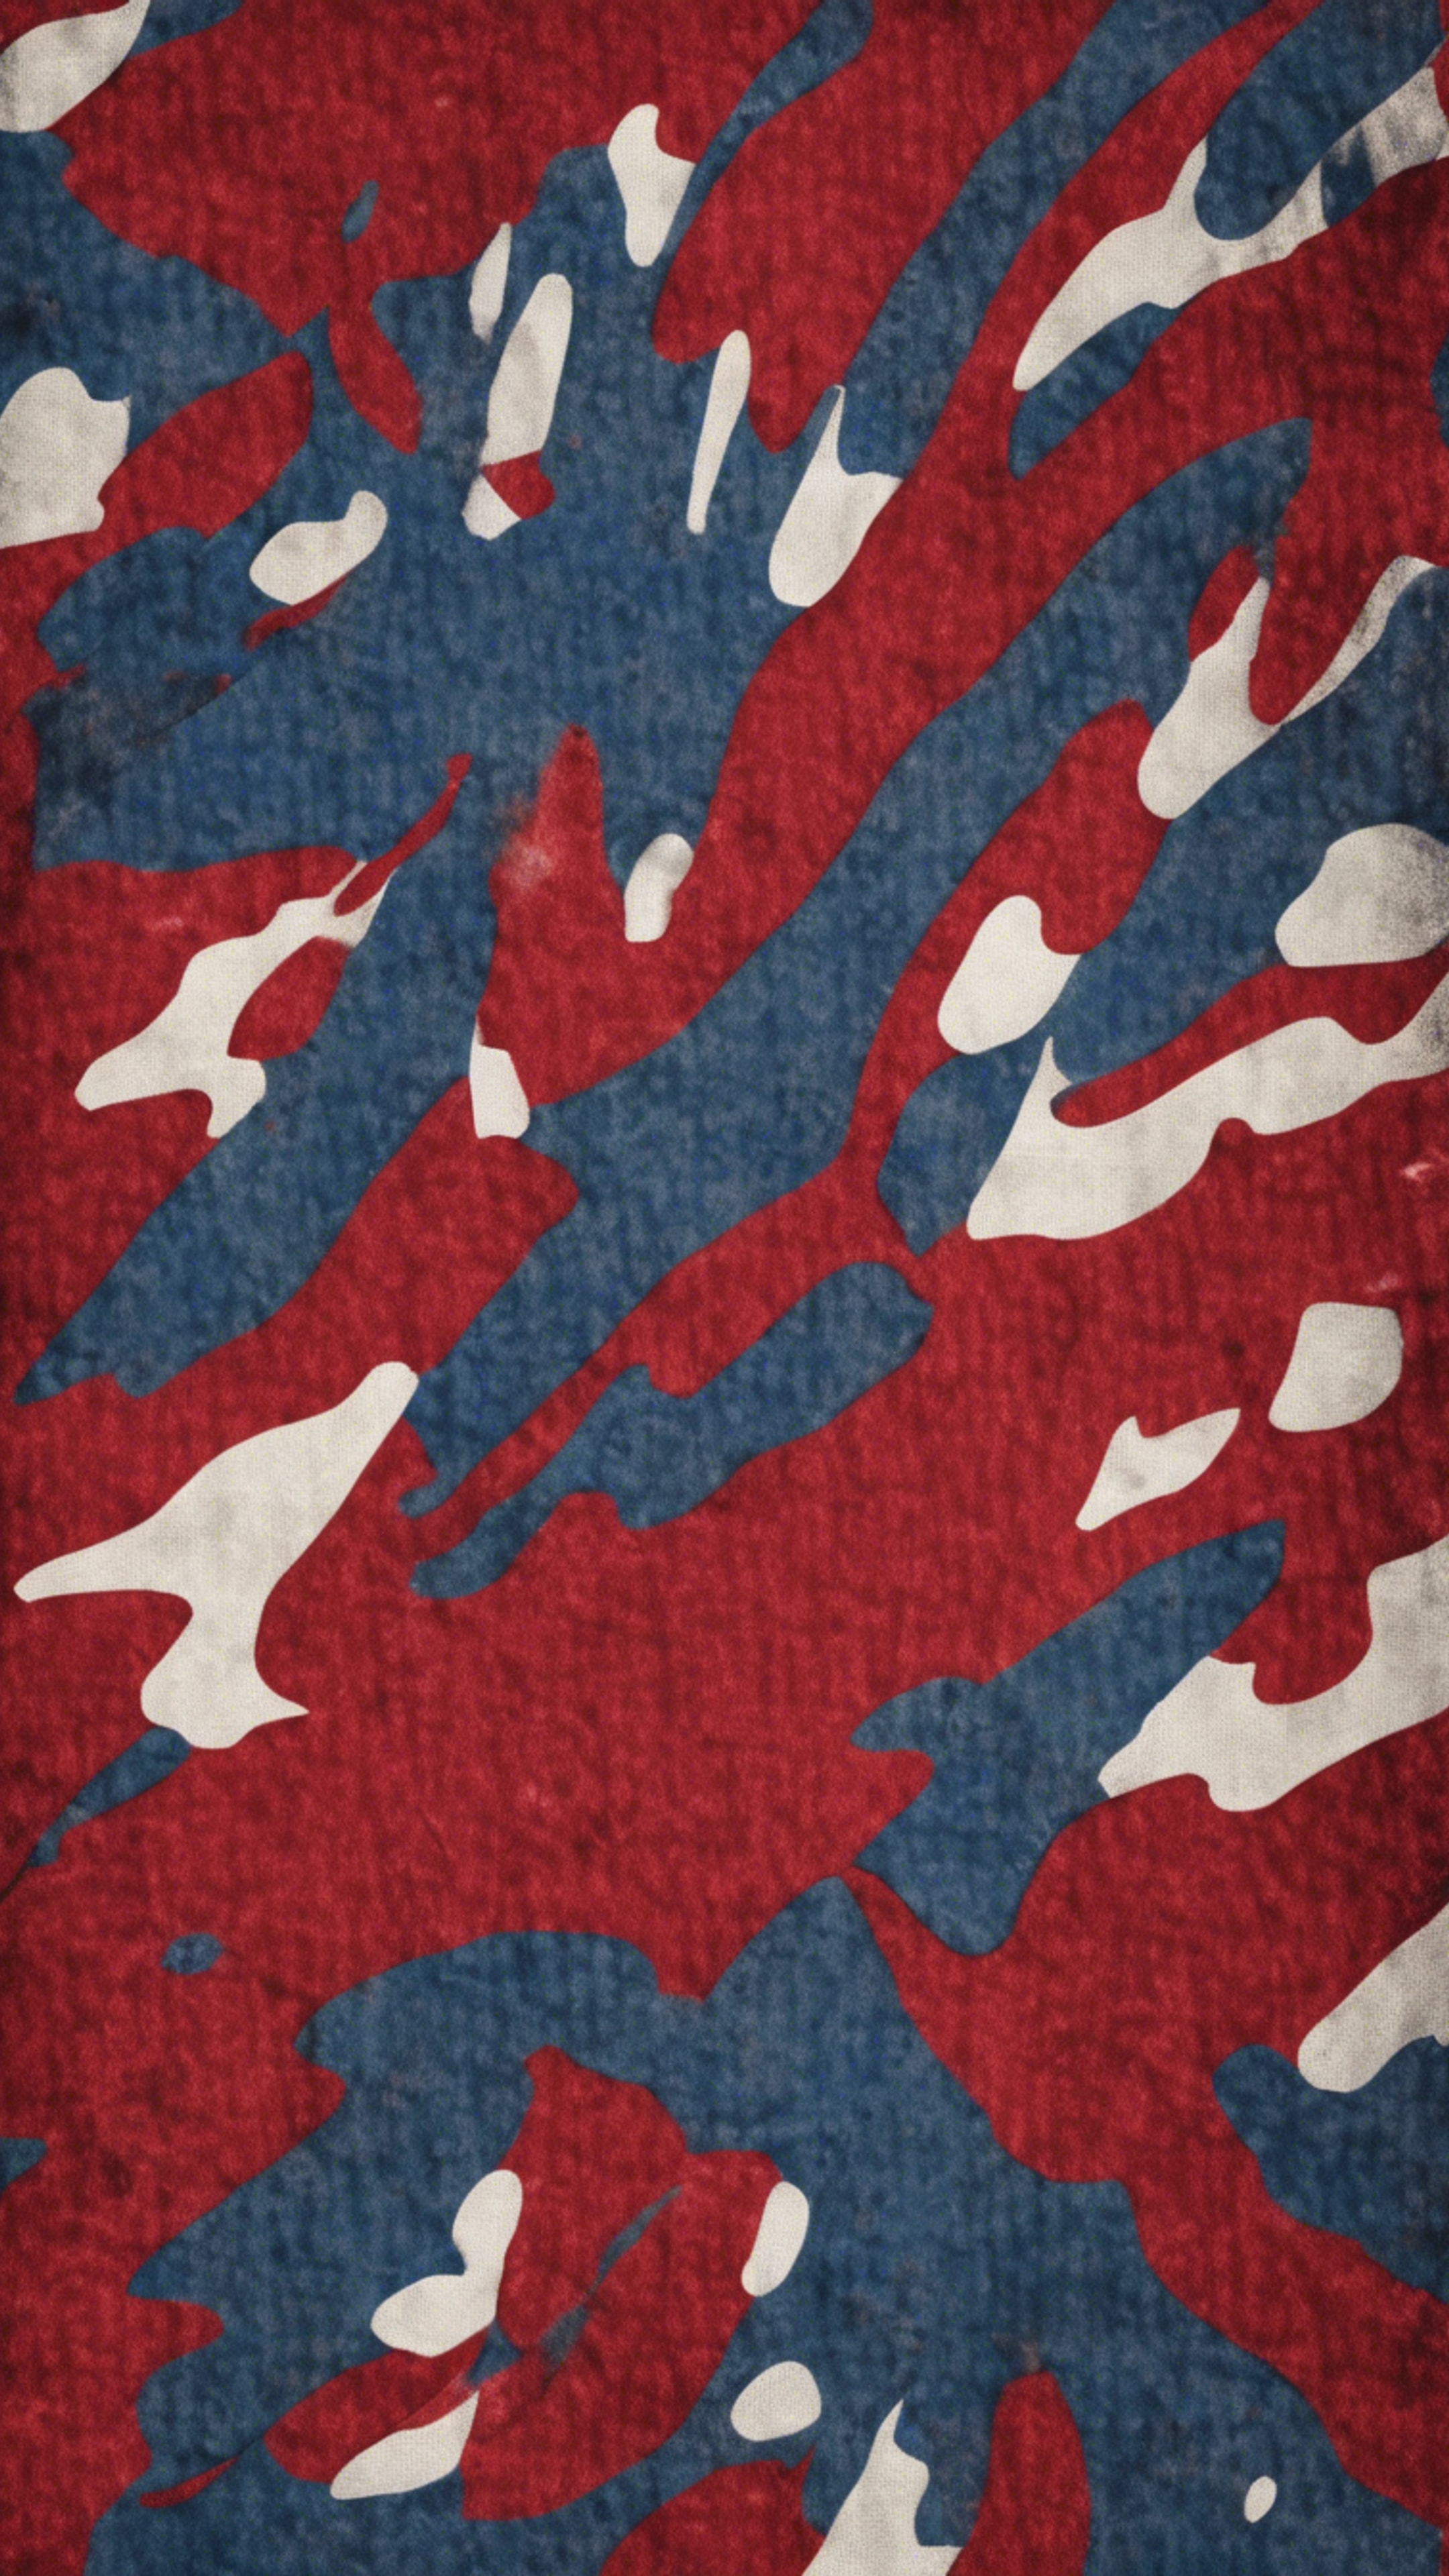 Red and blue camouflage pattern used in navy uniforms. 벽지[01ccfb252ca748fab57f]